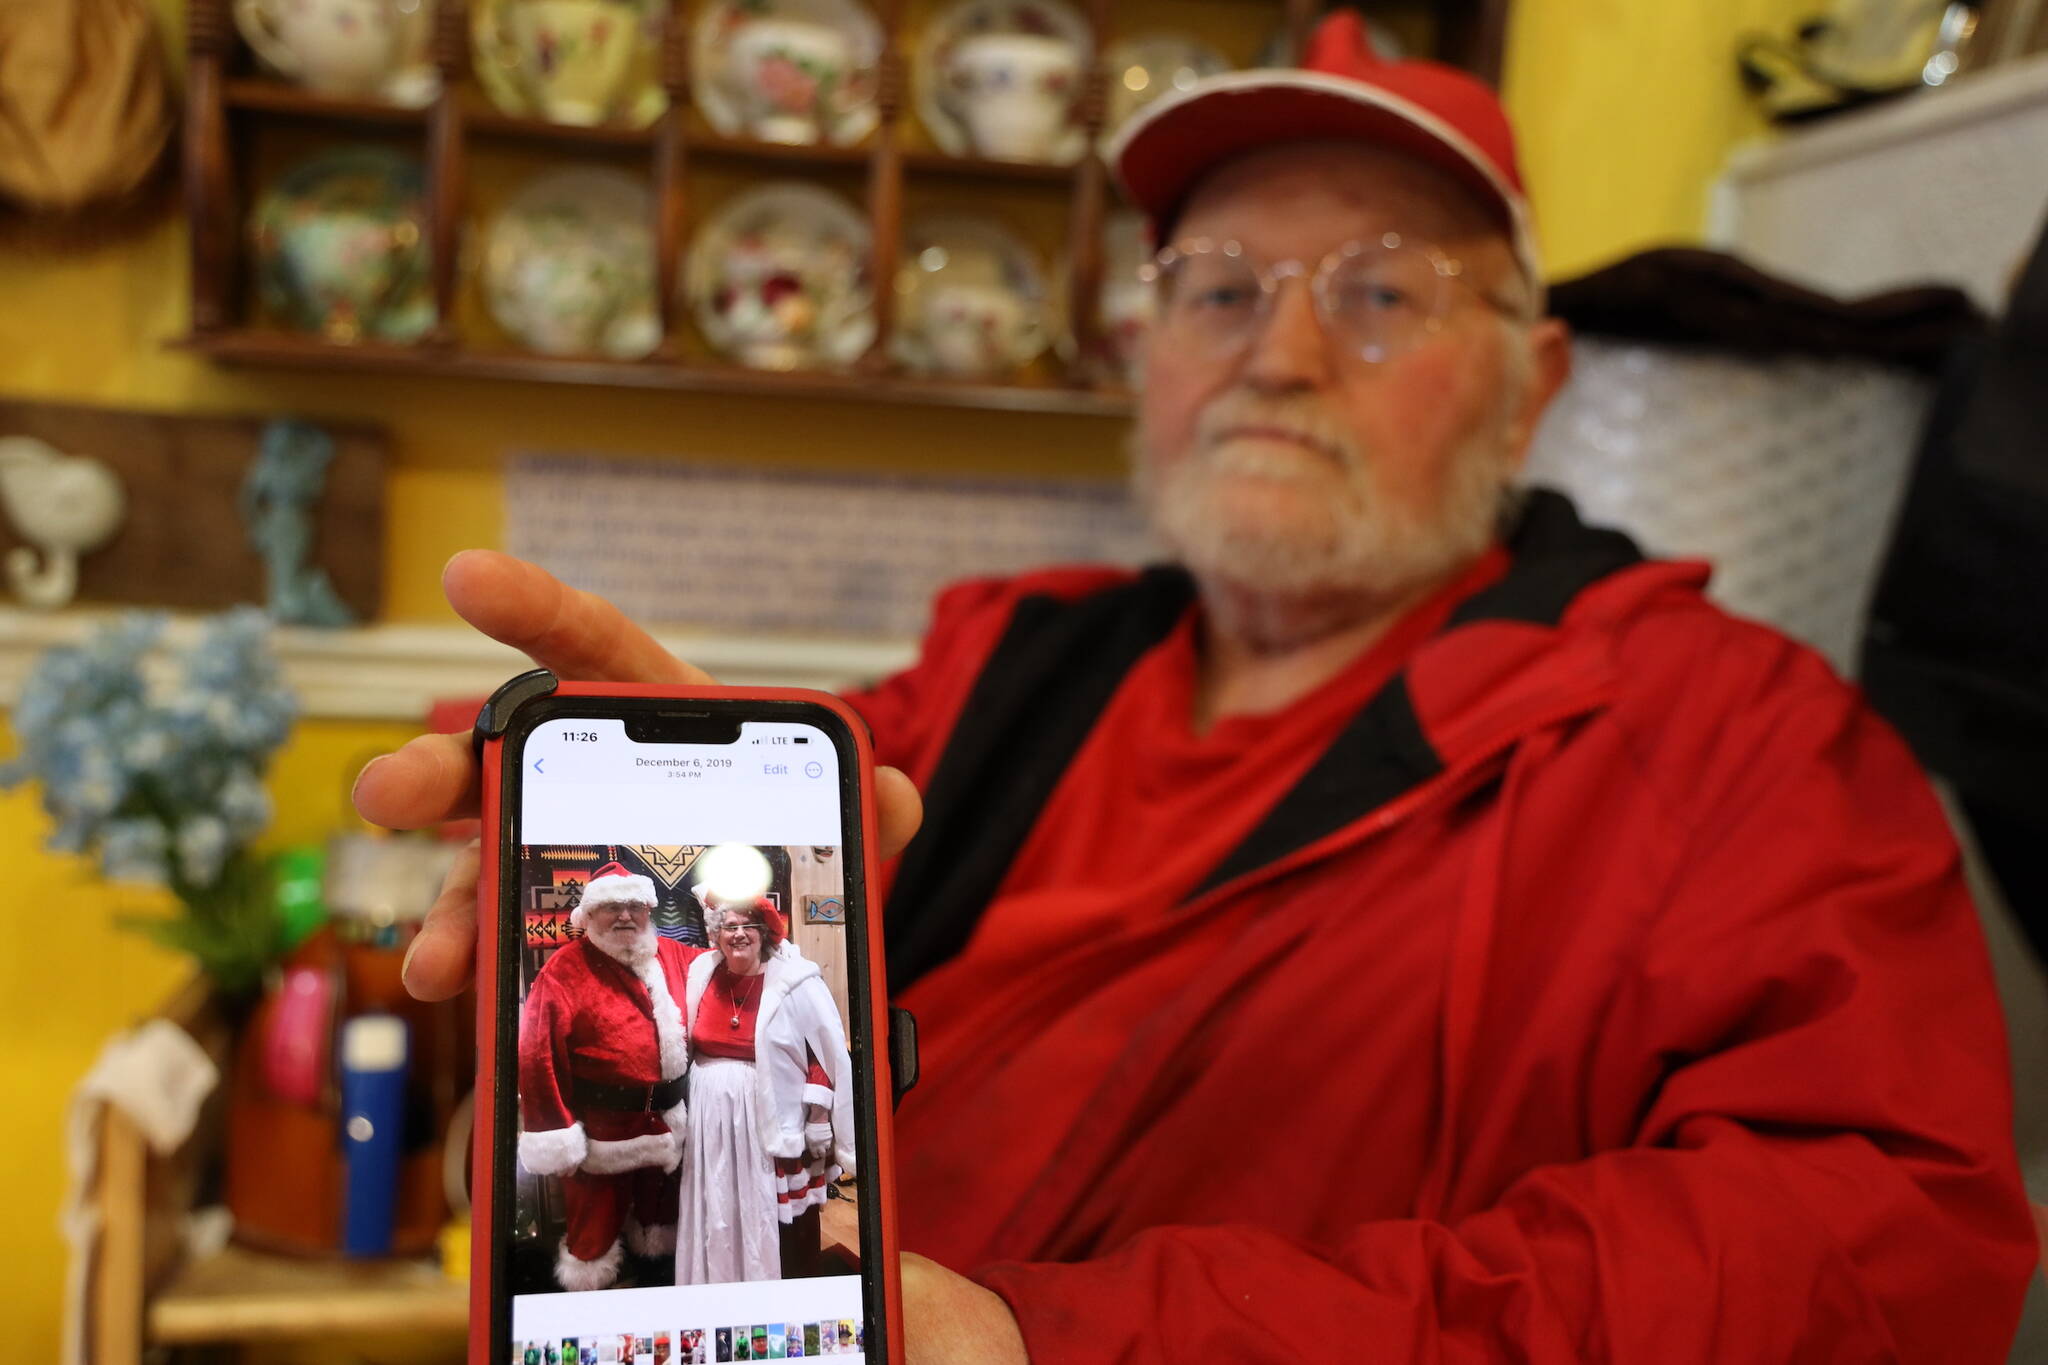 Dale Hudson holds his phone showing a photo of him and his late wife, Suzanne, dressed up as Mr. and Mrs. Claus. Dale is in the process of liquidating his wife’s store, Nana’s Attic, after her recent death in late February. (Clarise Larson / Juneau Empire)